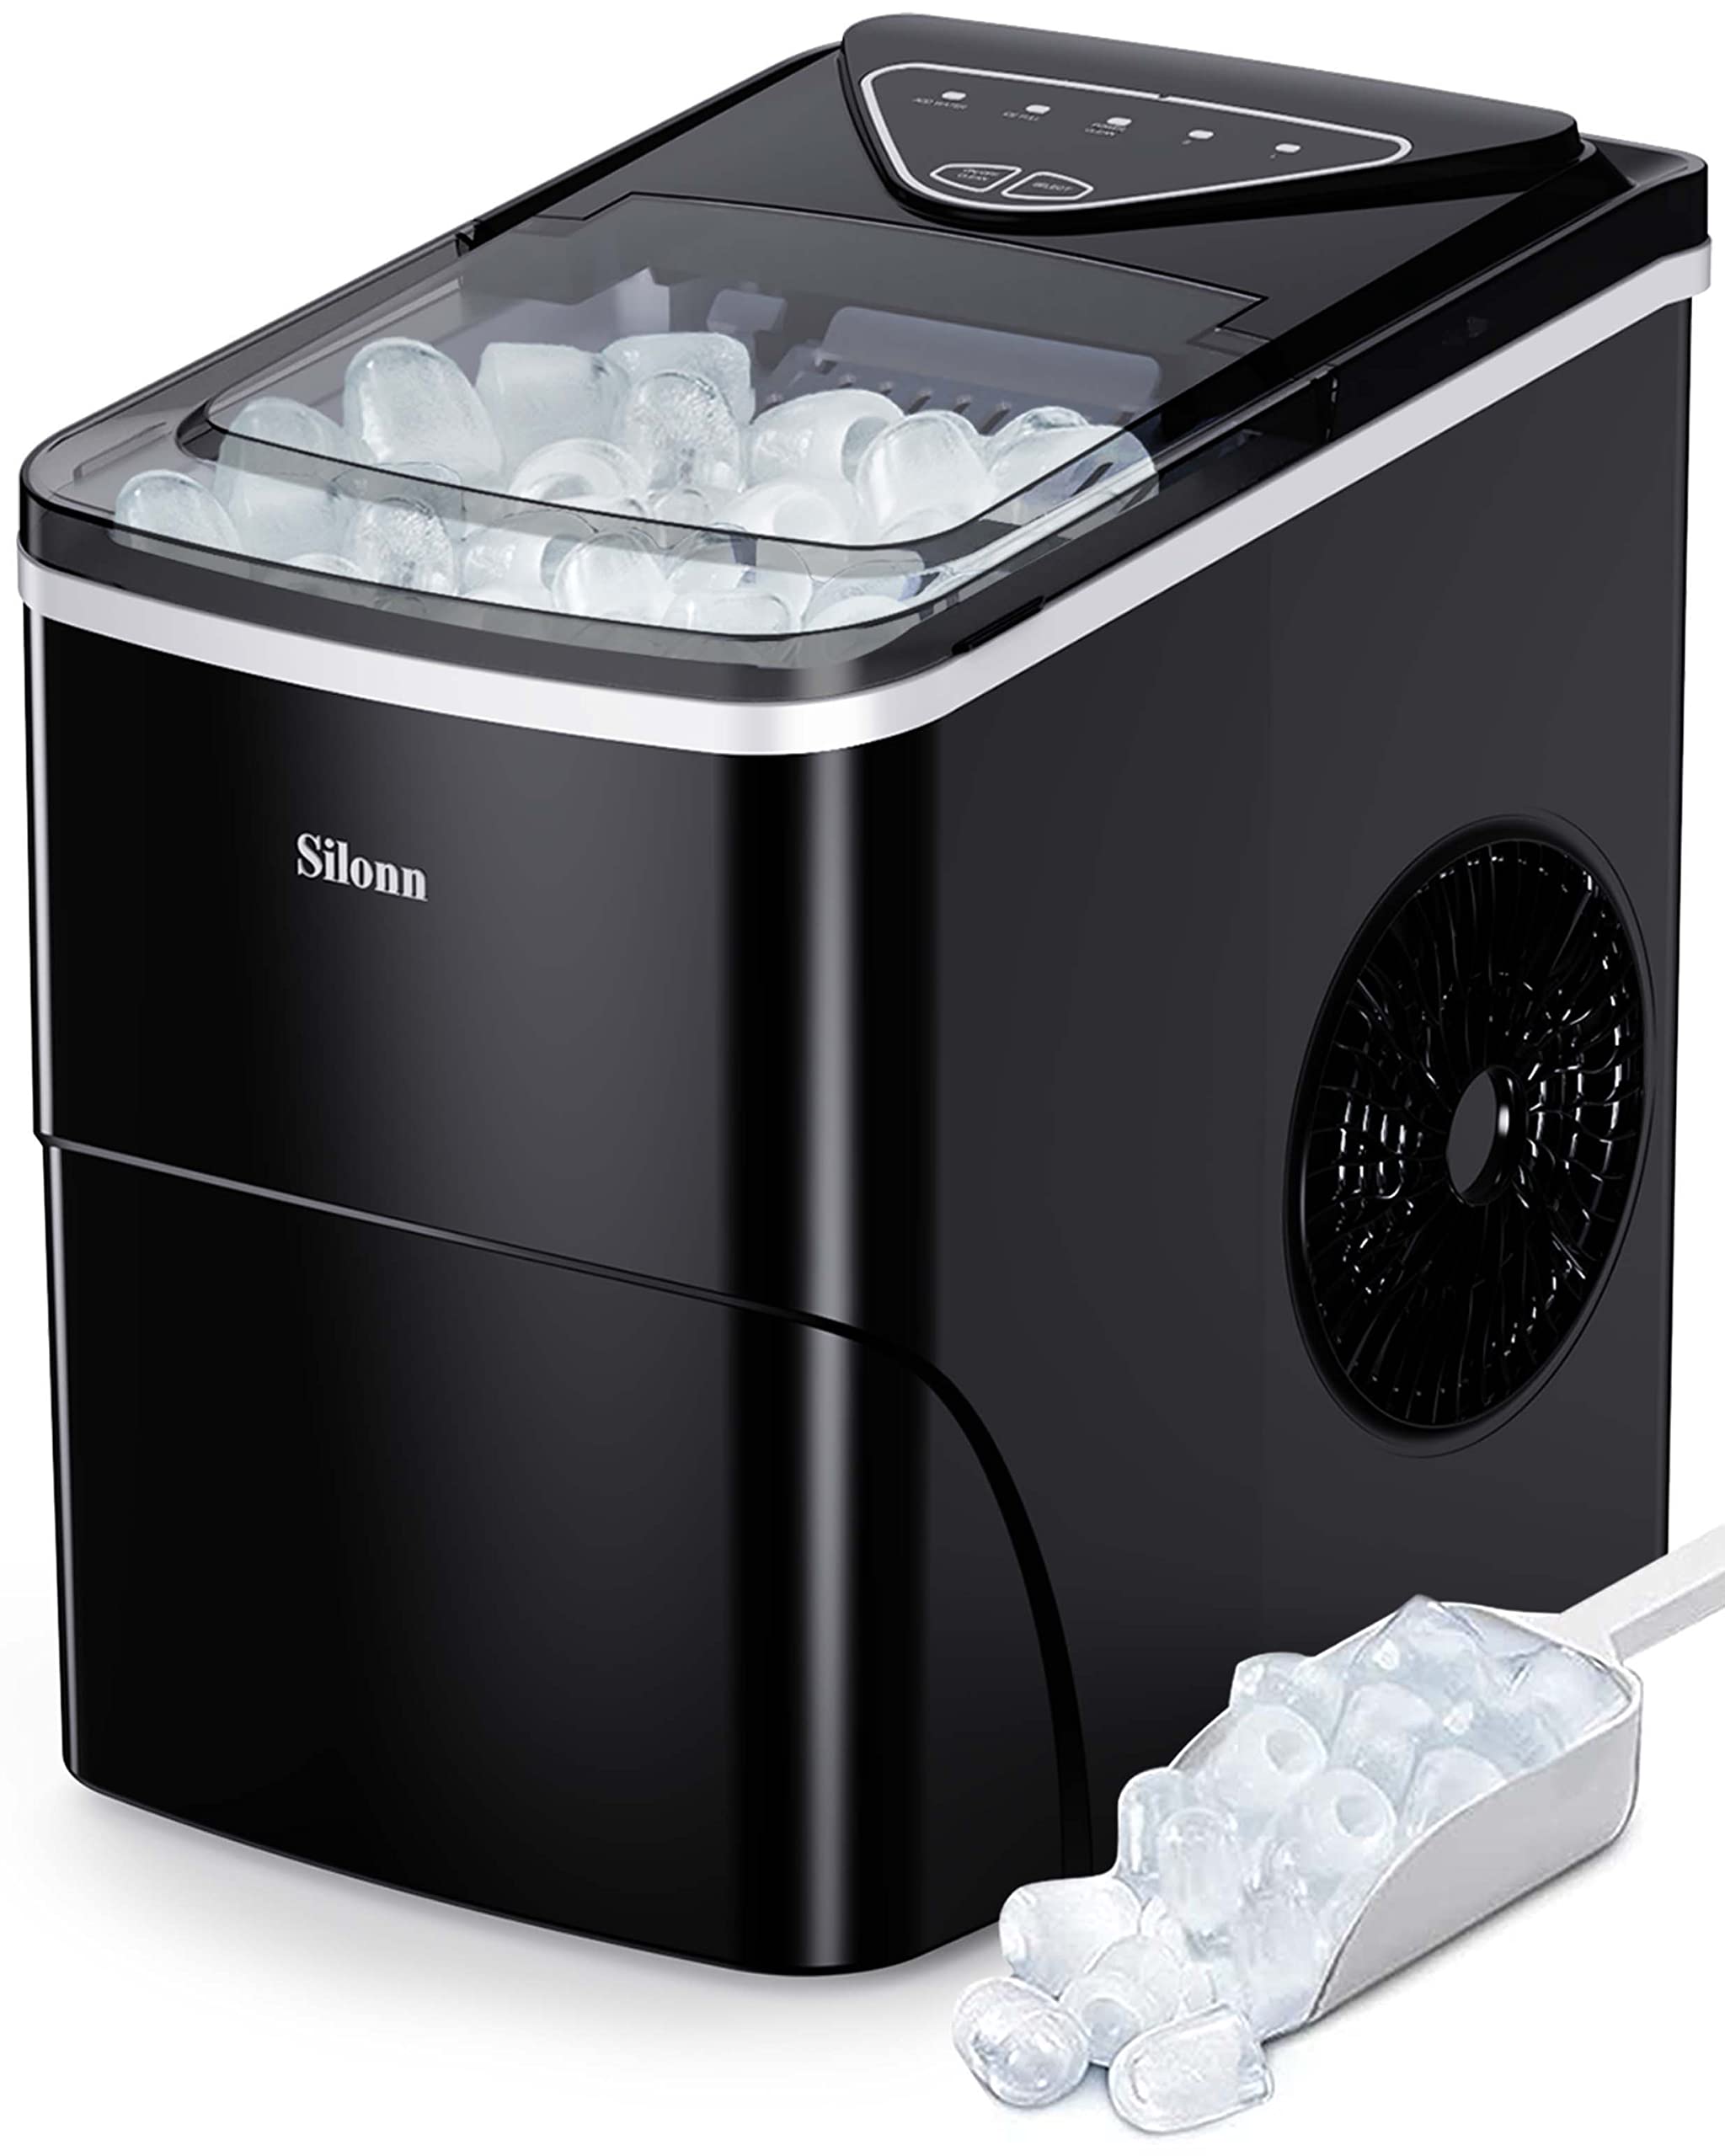 COMFEE 3.3 Cubic Feet Solo Series Retro Refrigerator Sleek Appearance HIPS Interior [Black] & Silonn Ice Makers Countertop, 9 Cubes Ready in 6 Mins, 26lbs in 24Hrs, Self-Cleaning Ice Machine